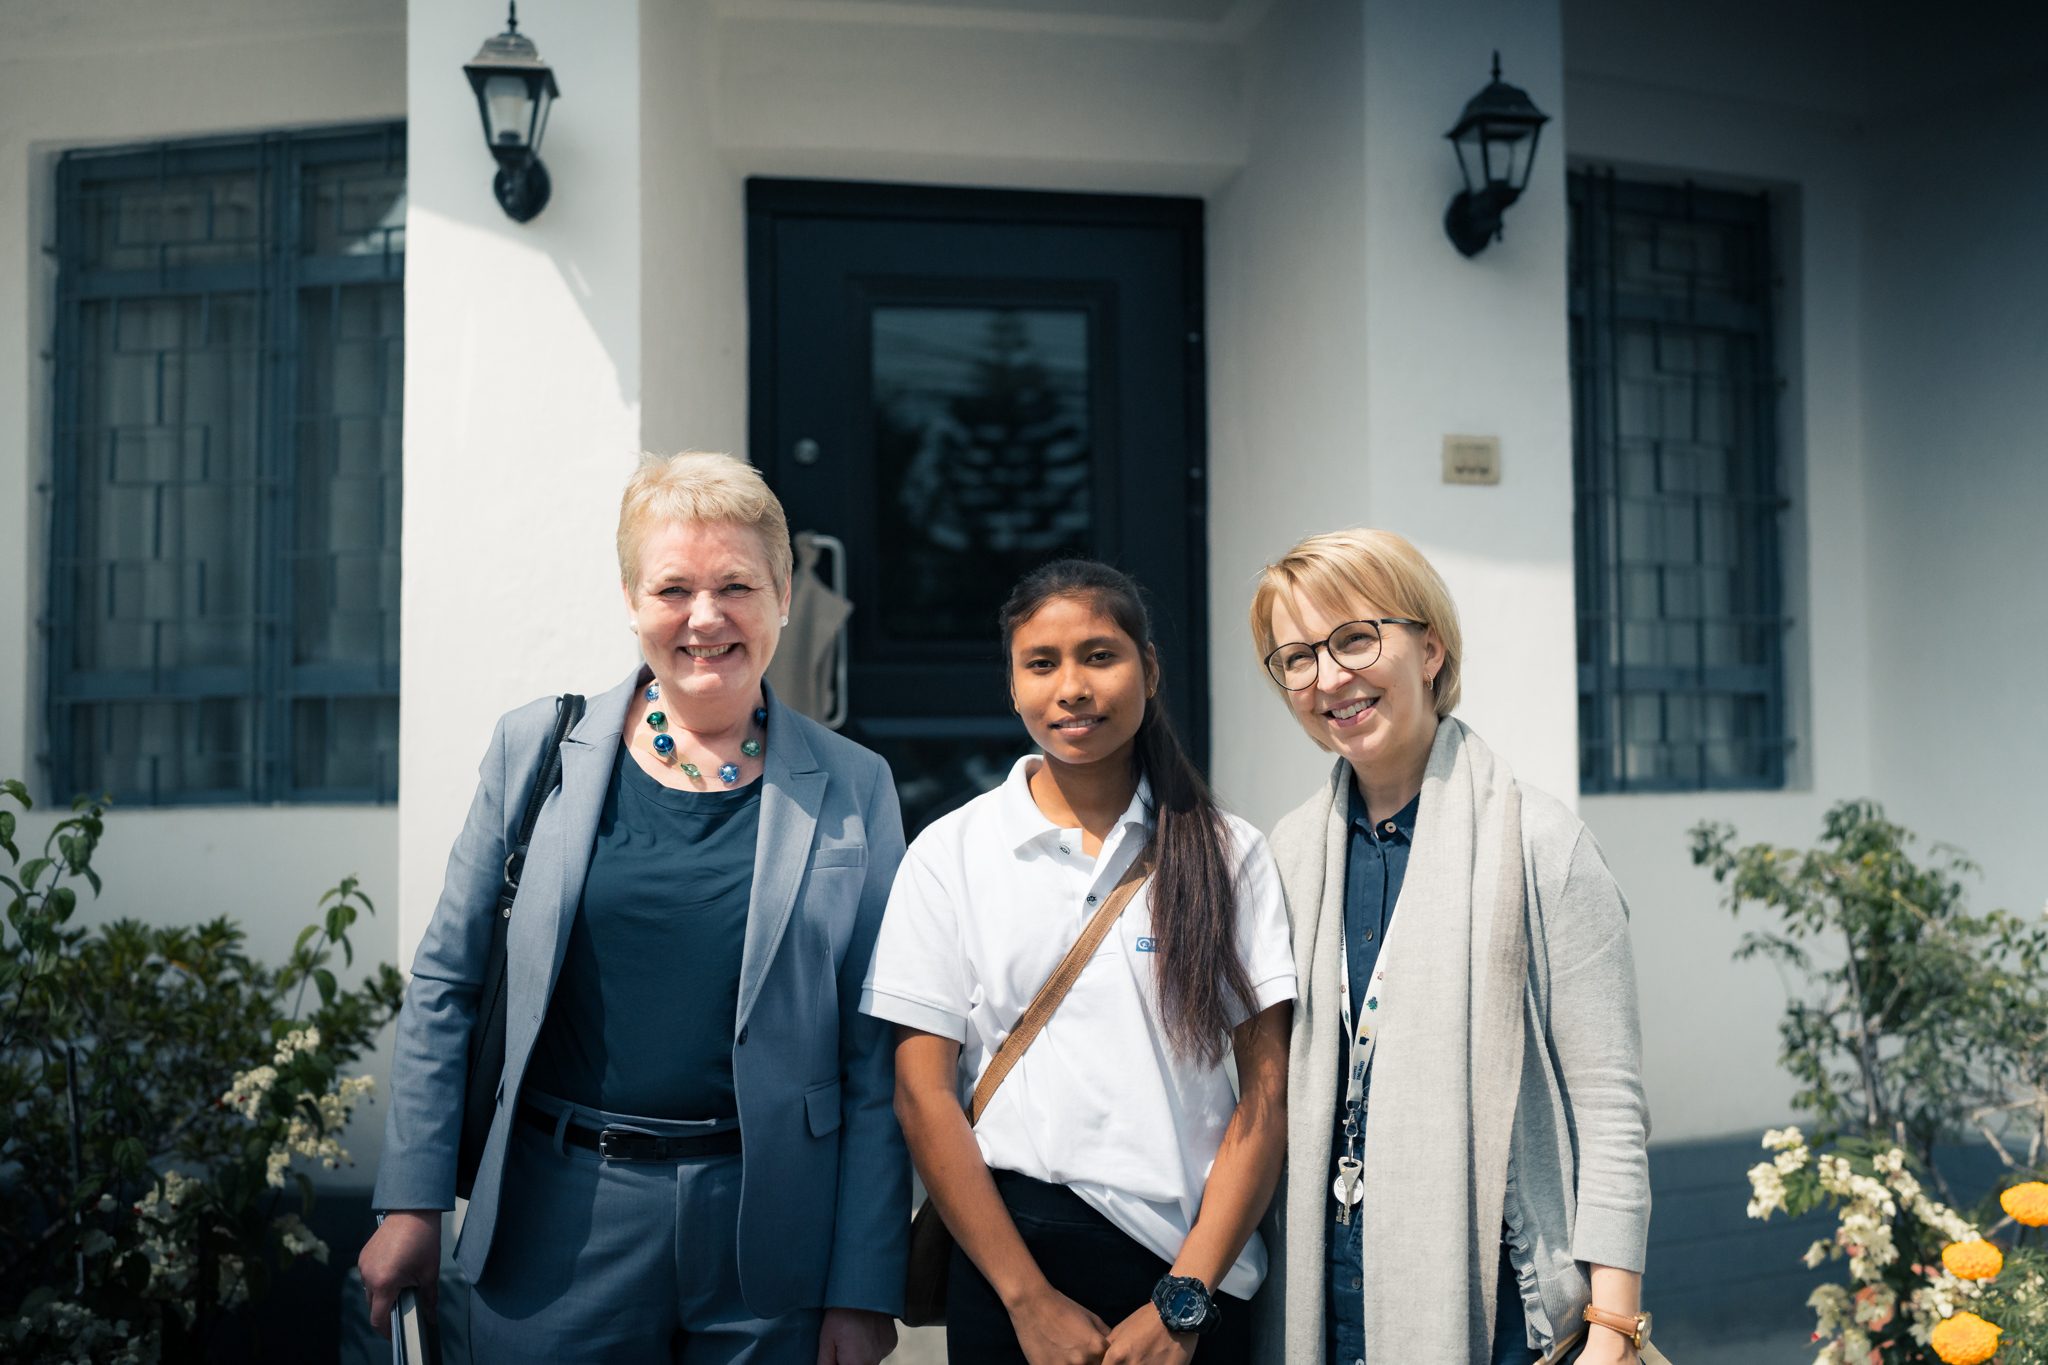 Sangita is posing in front of Finnish Embassy with ambassadors of Norway (on her right) and Finland (on her left). 